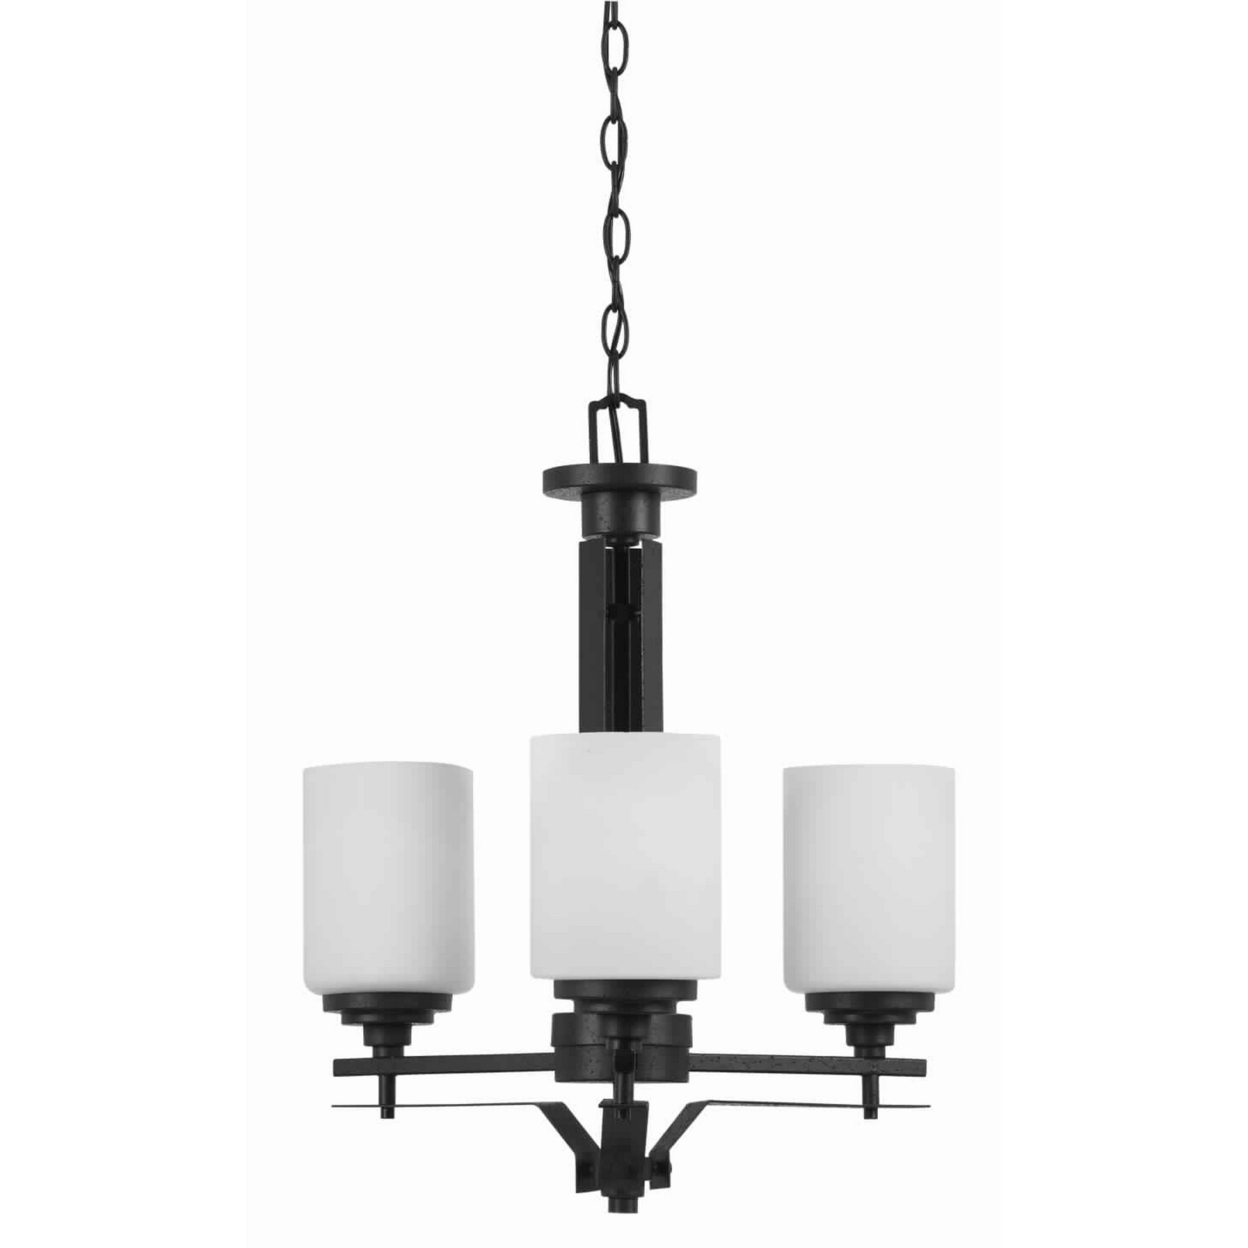 3 Bulb Uplight Chandelier With Metal Frame And Glass Shade, Black And White- Saltoro Sherpi